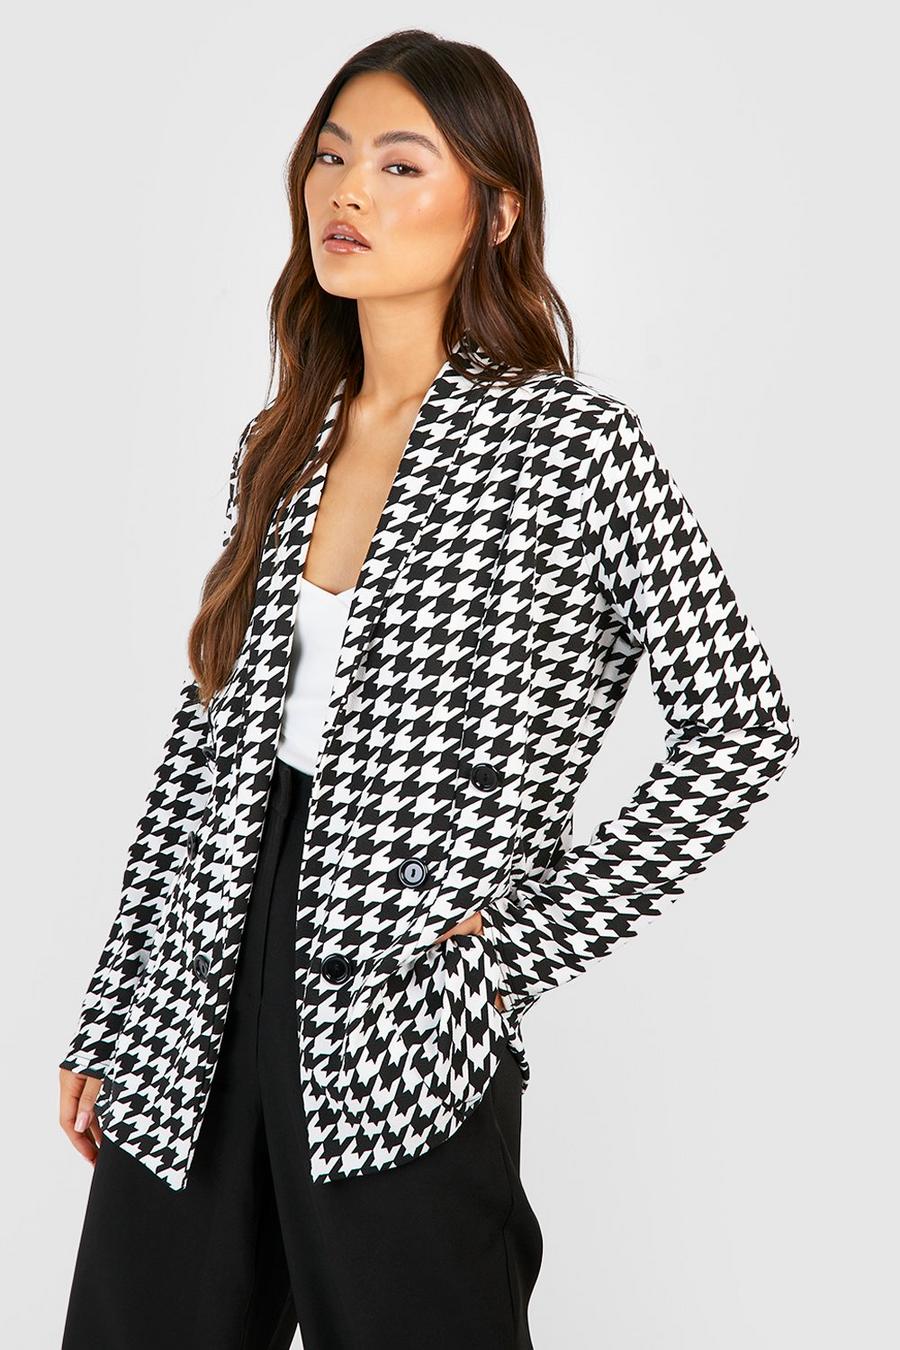 Black Basic Pastel Jersey Knit Flannel Relaxed Fit Blazer